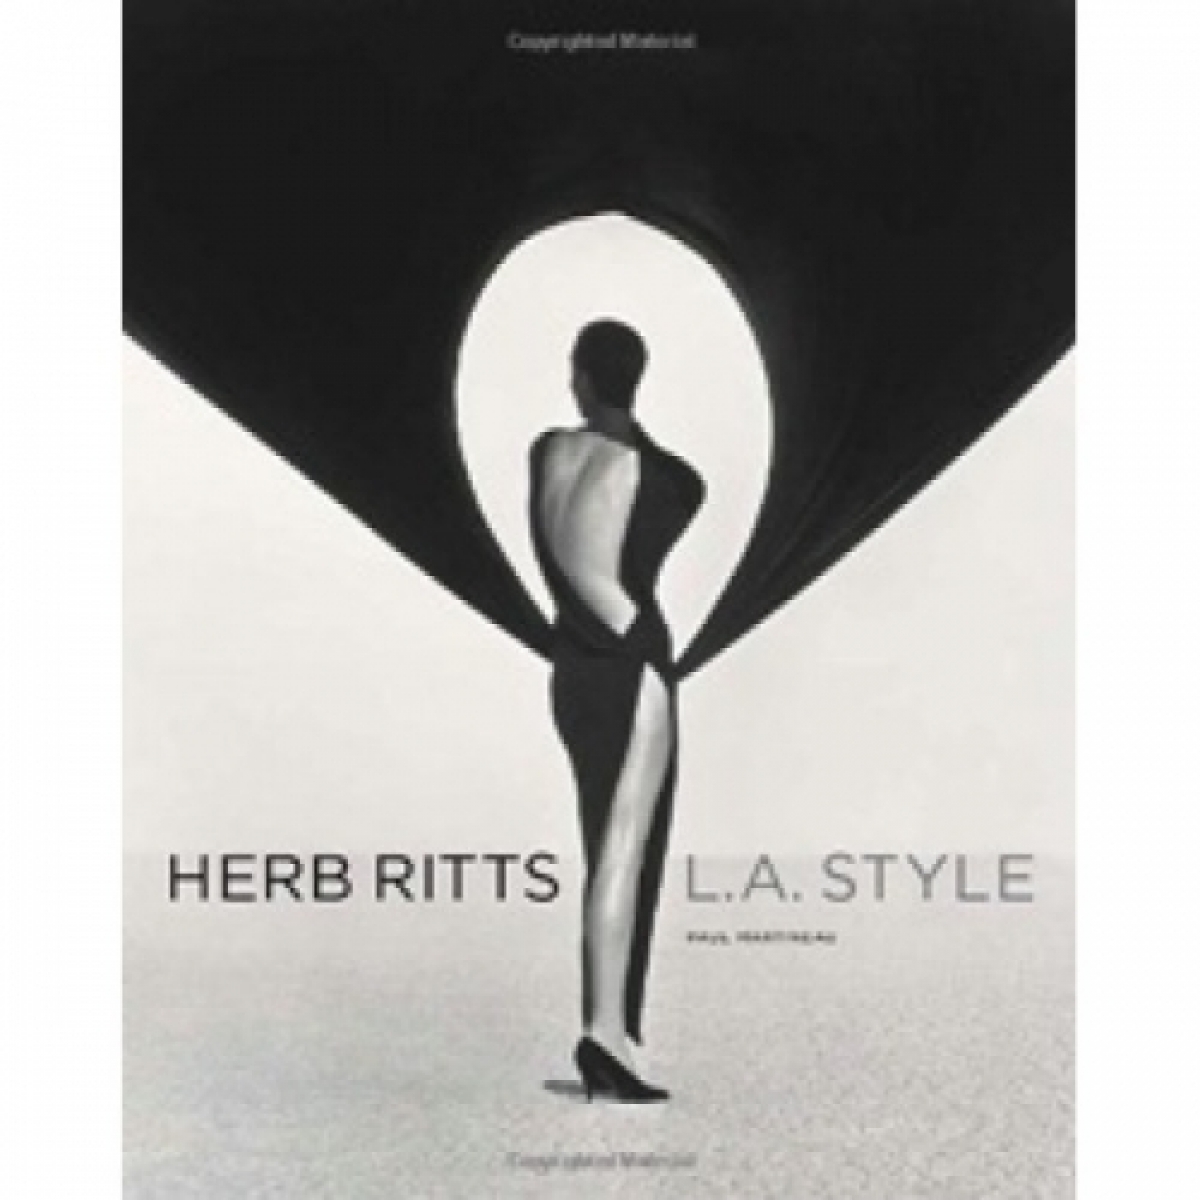 Herb Ritts: L.A. Style 